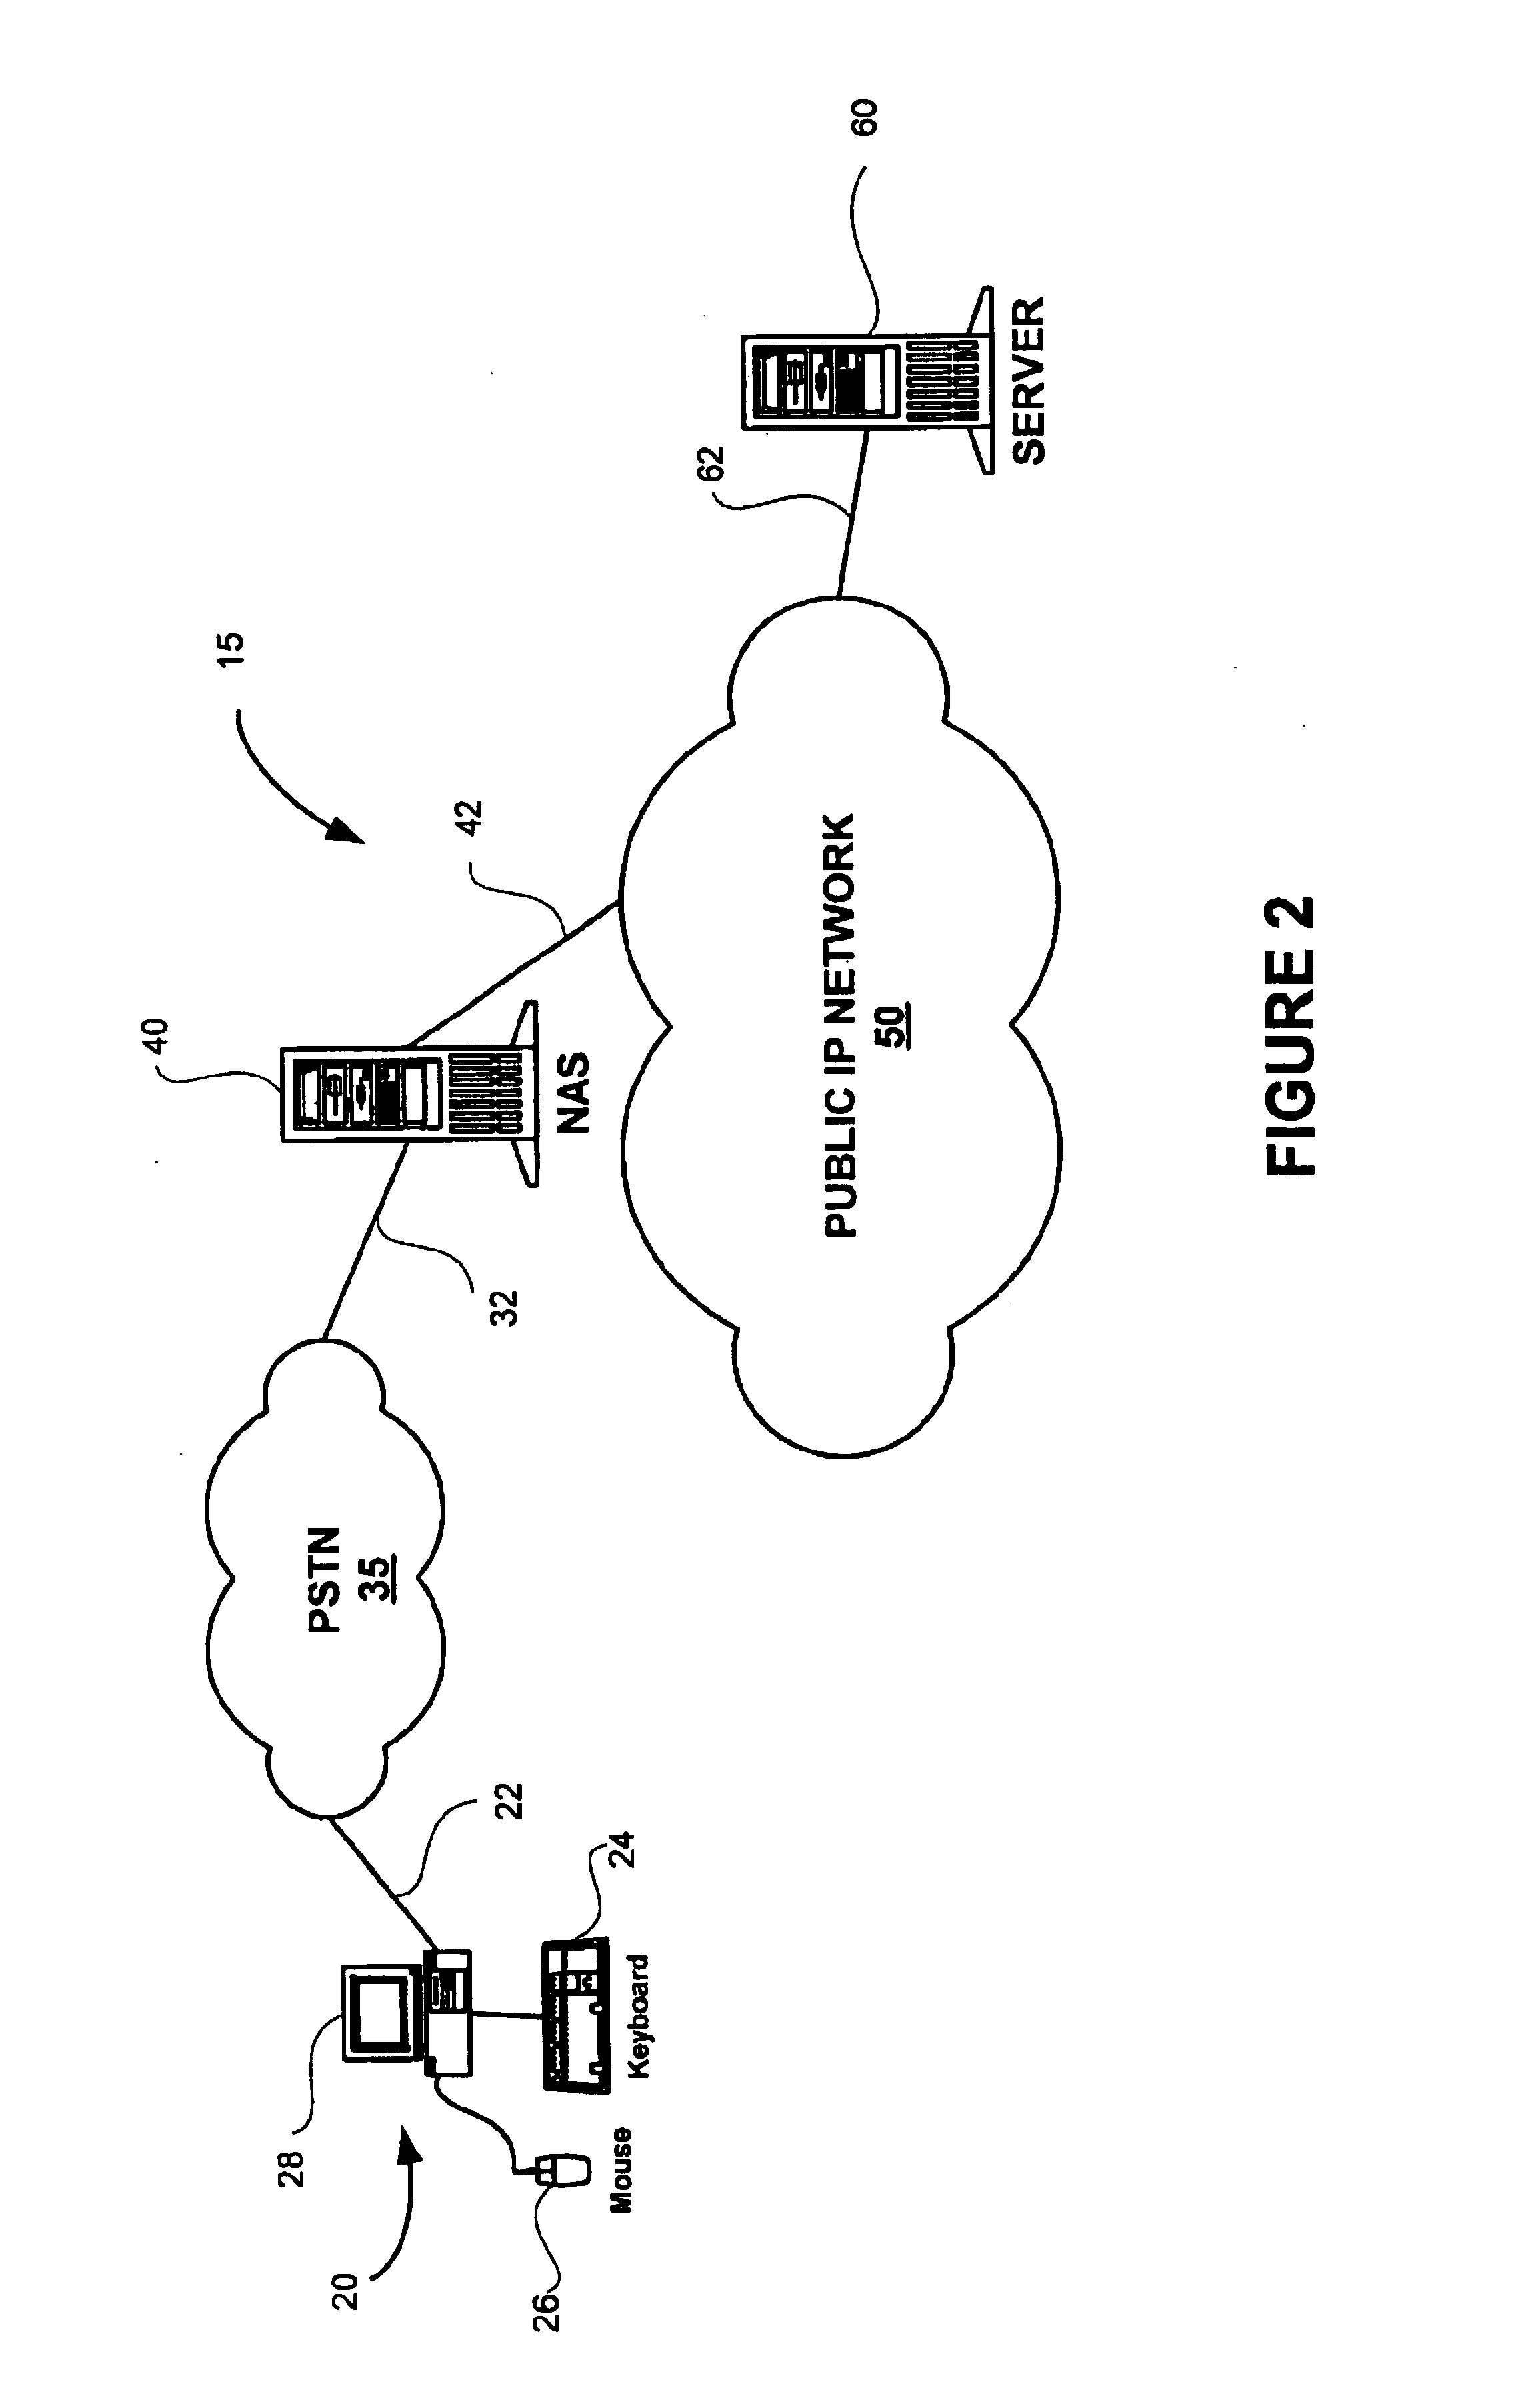 System and method for automatically configuring a client device